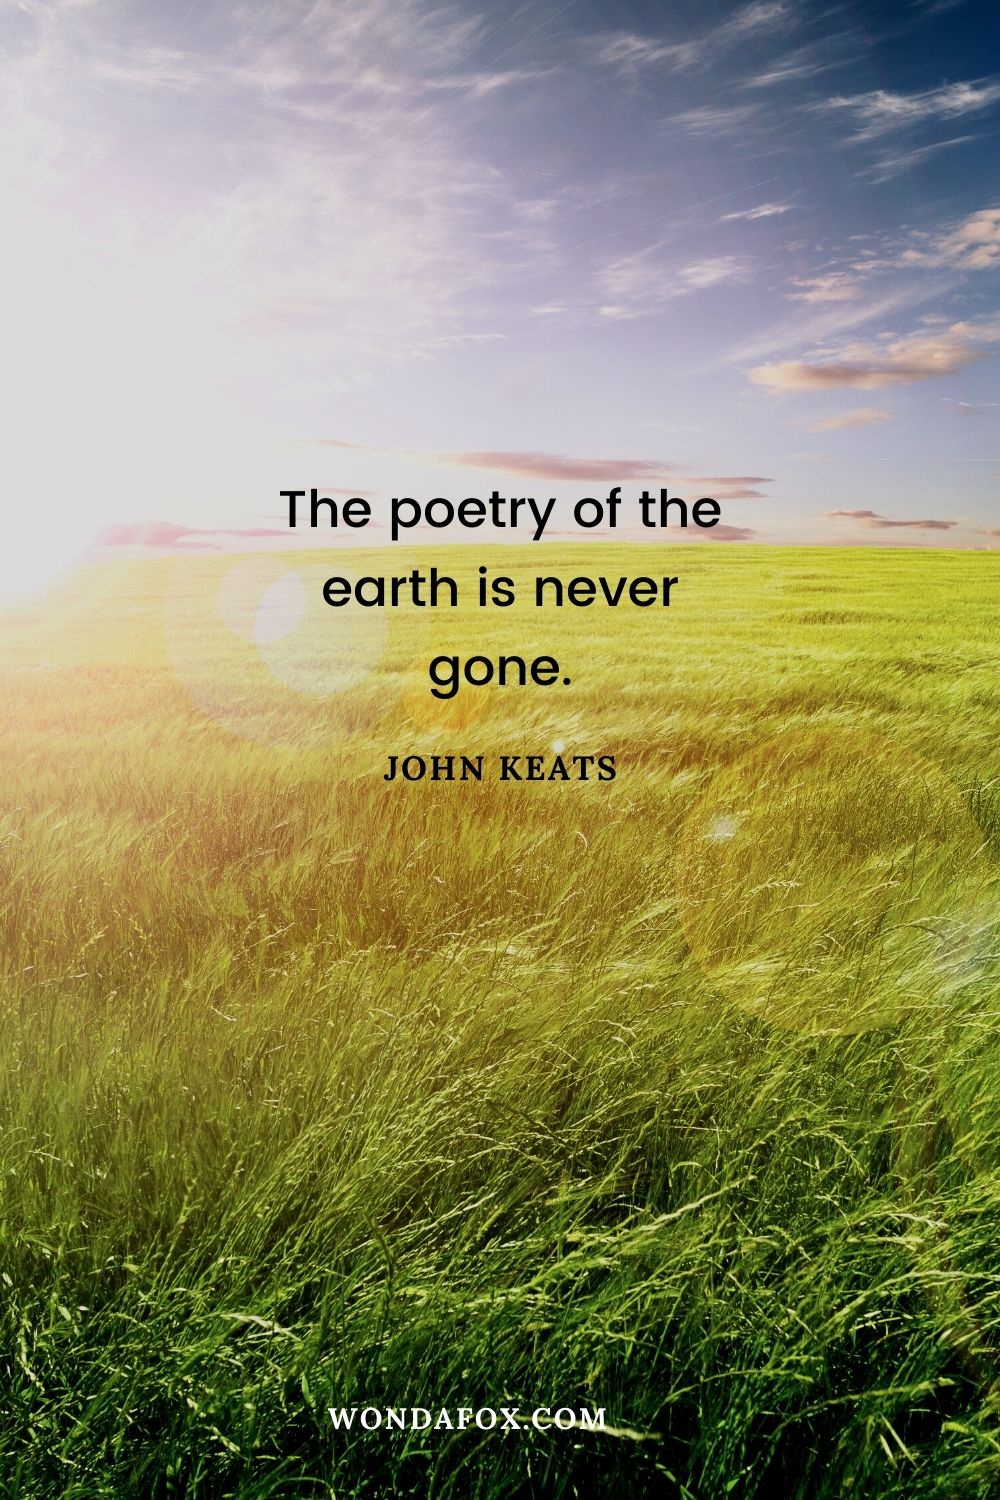 The poetry of the earth is never gone.”